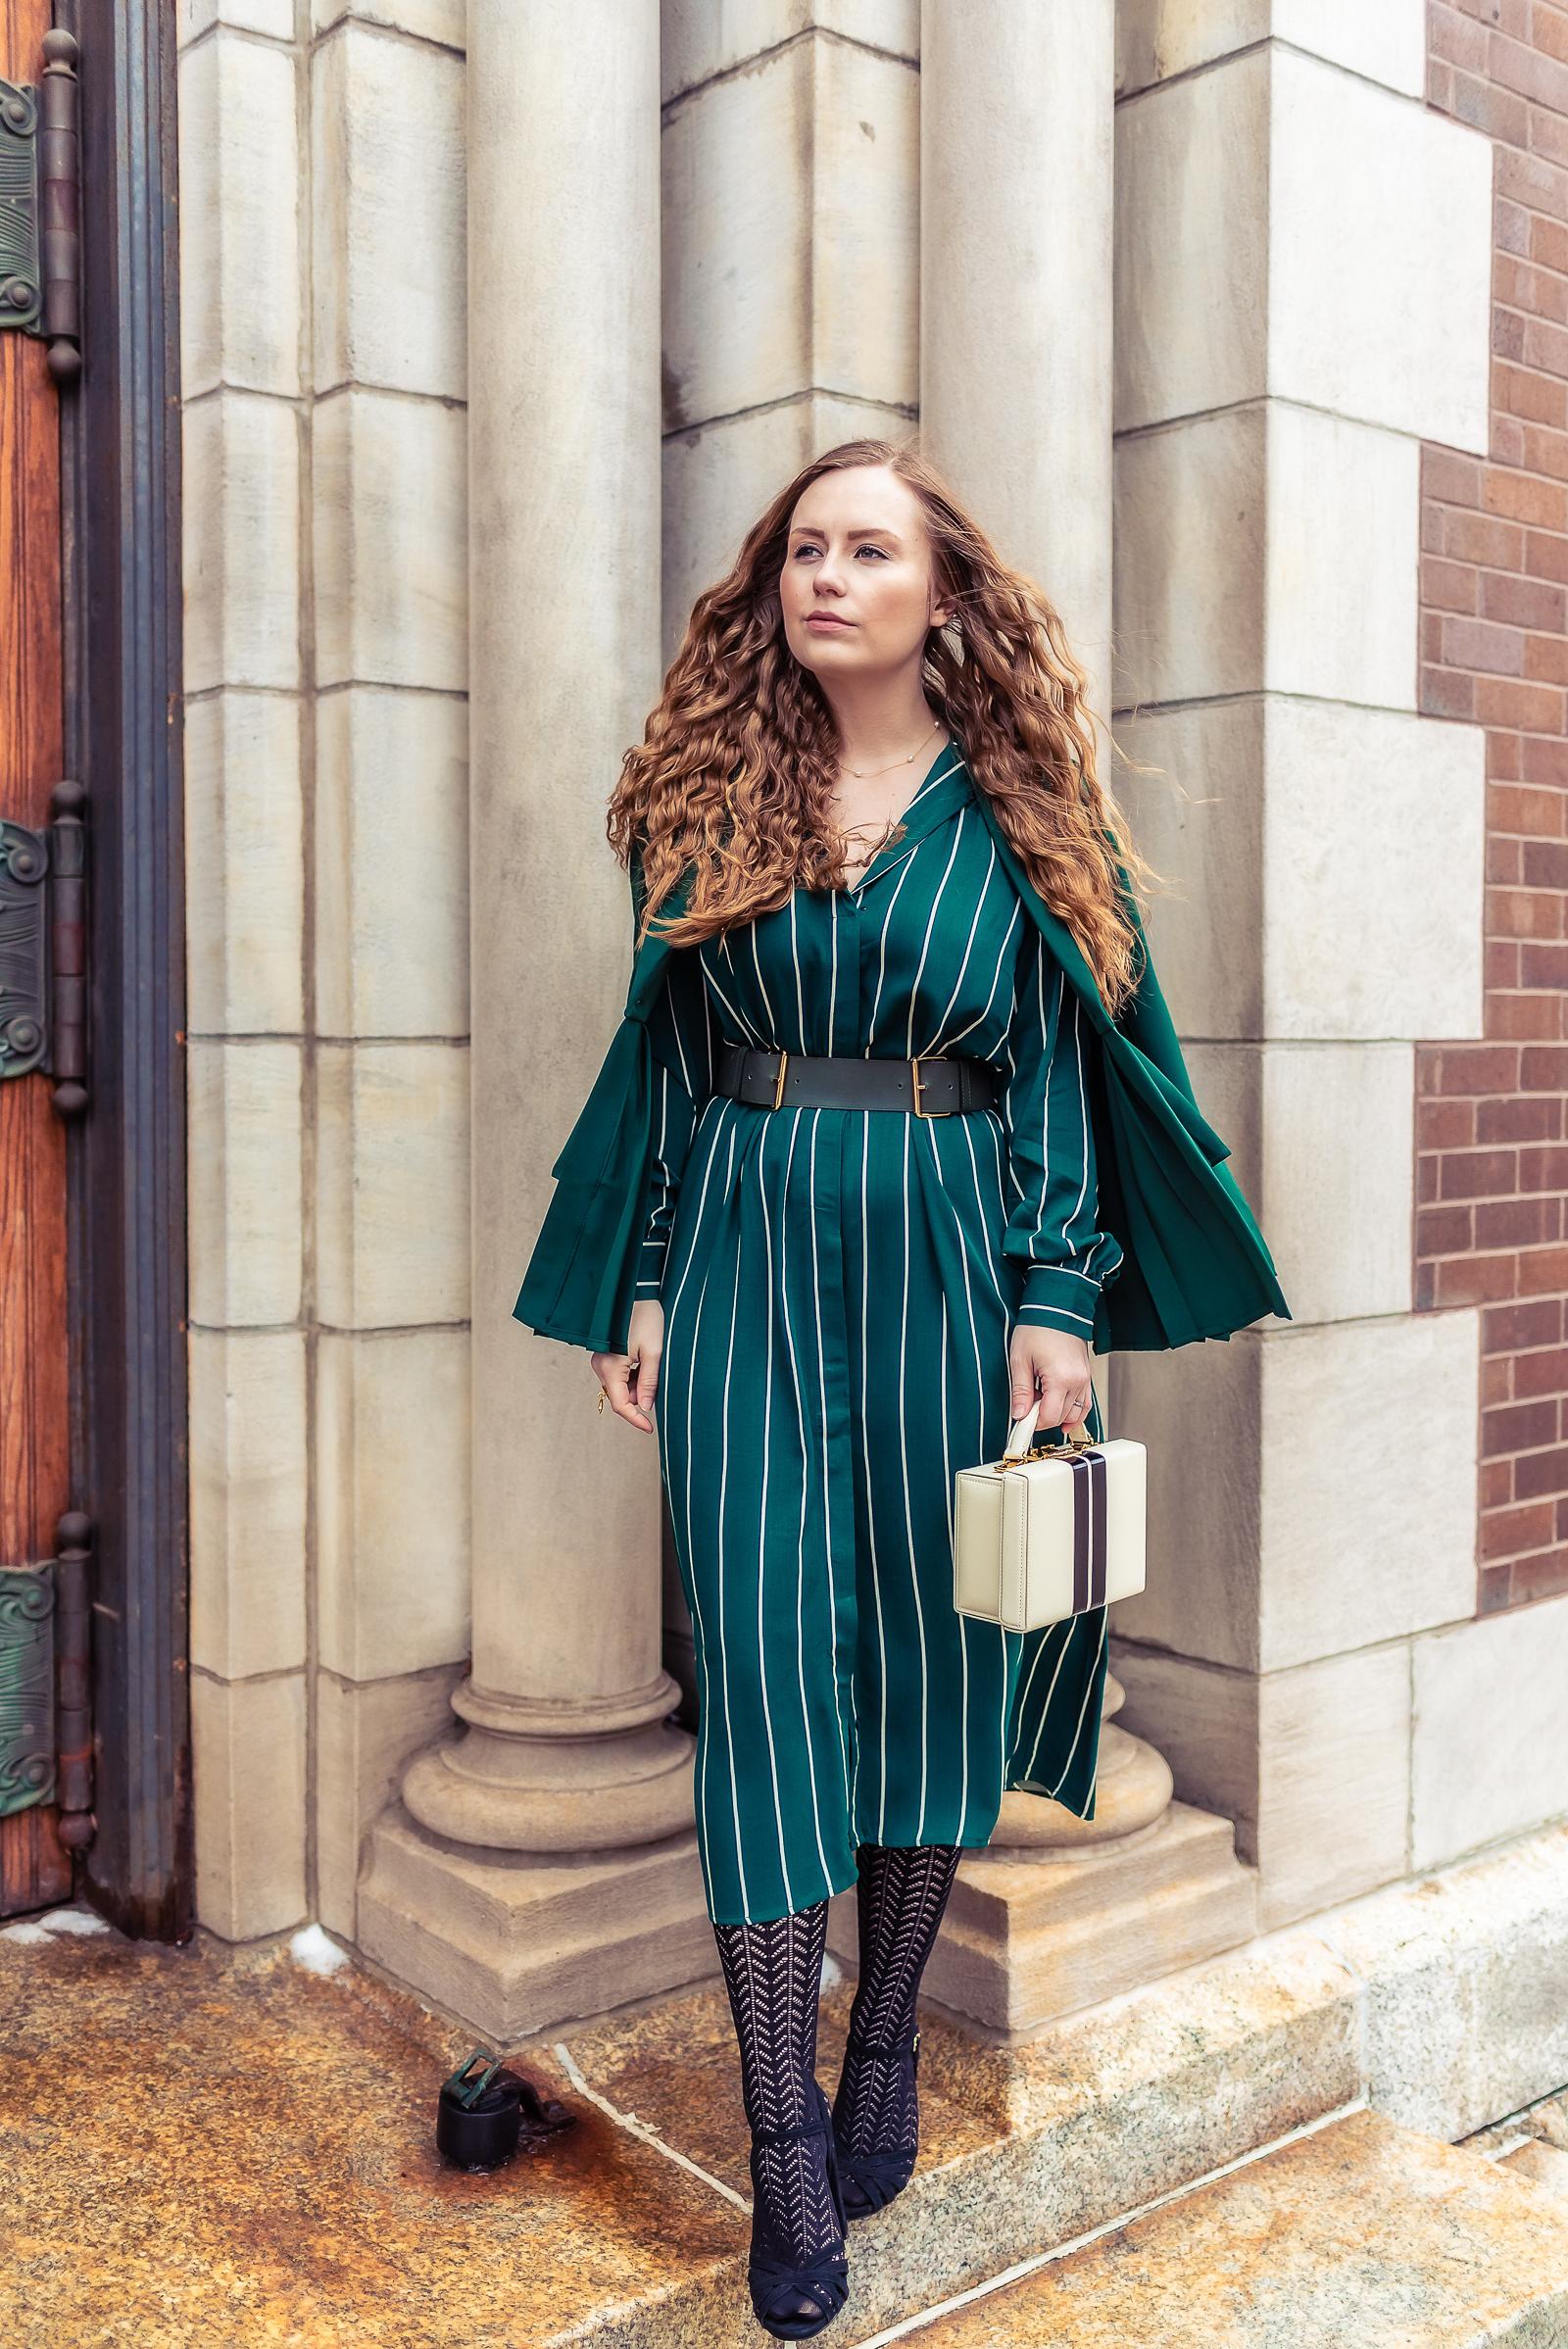 Green Monochrome Outfit for St. Patrick's Day